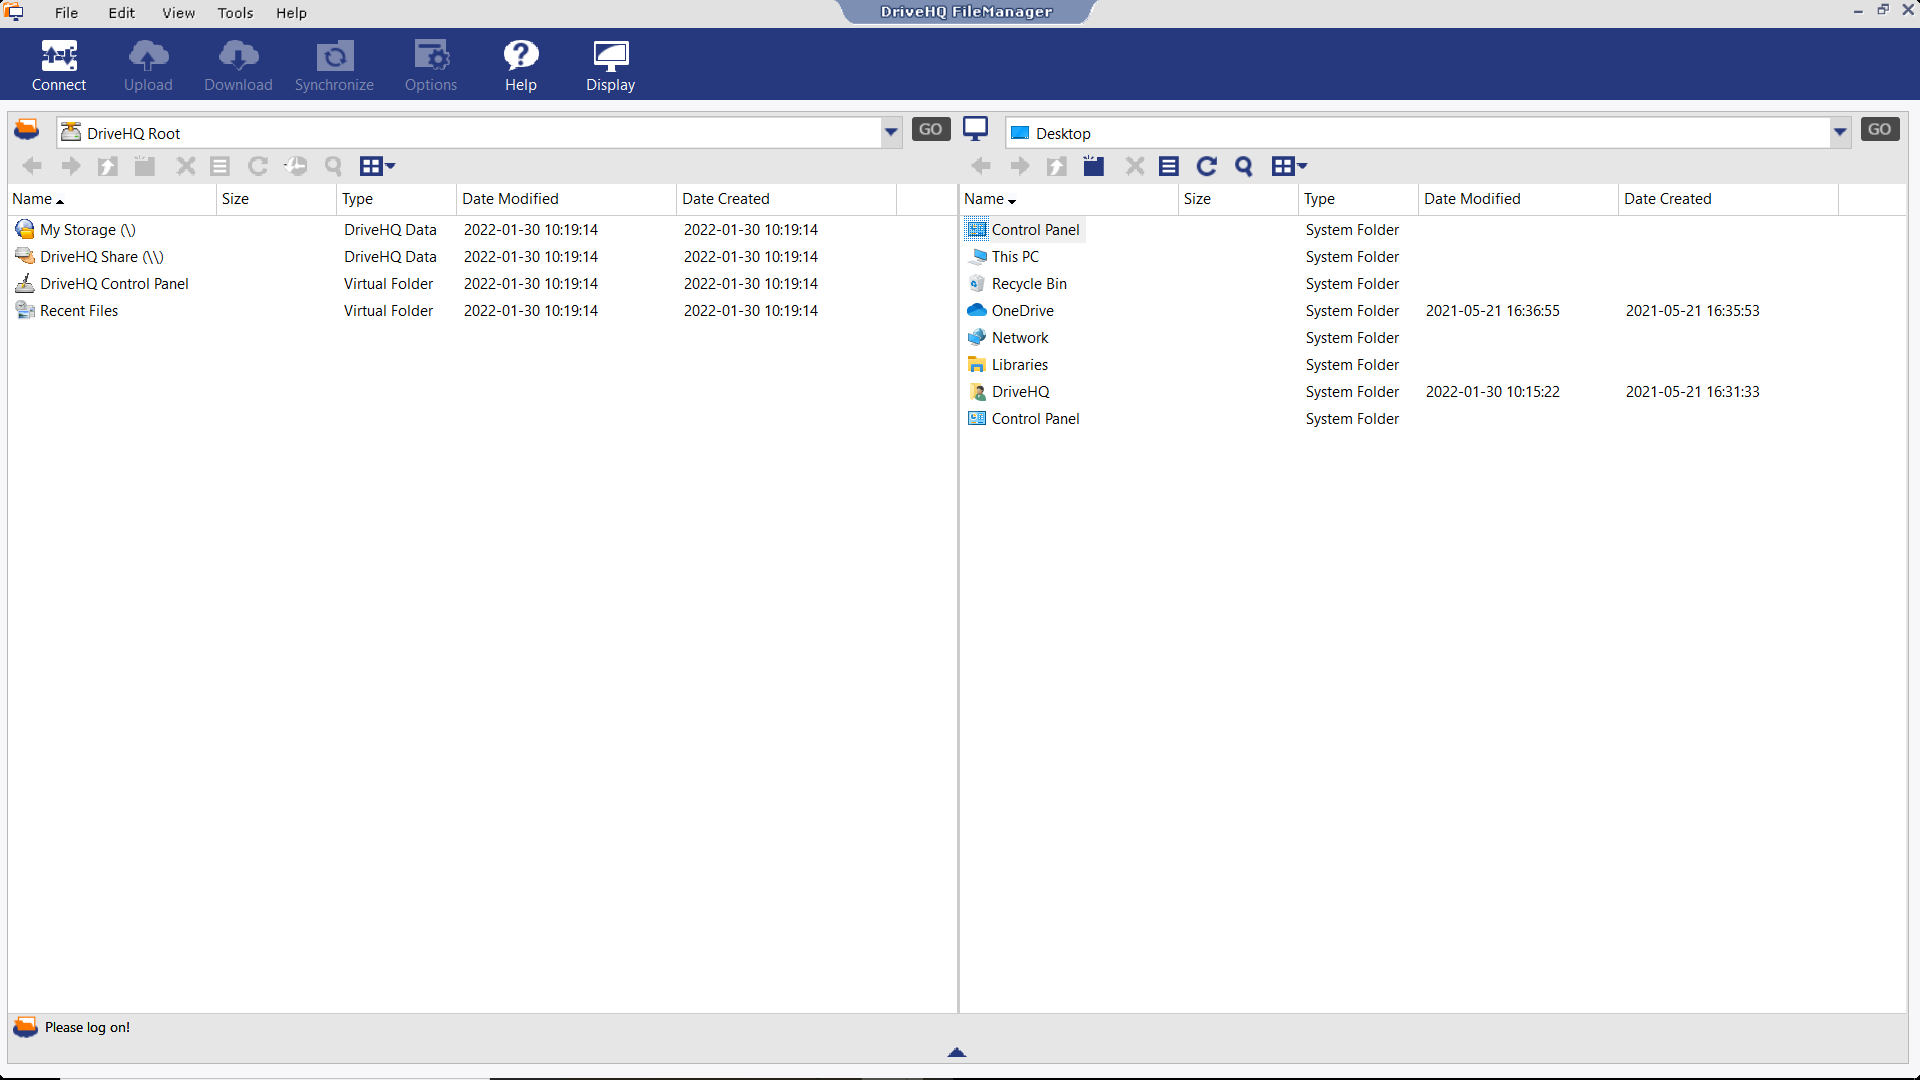 DriveHQ FileManager Store Edition